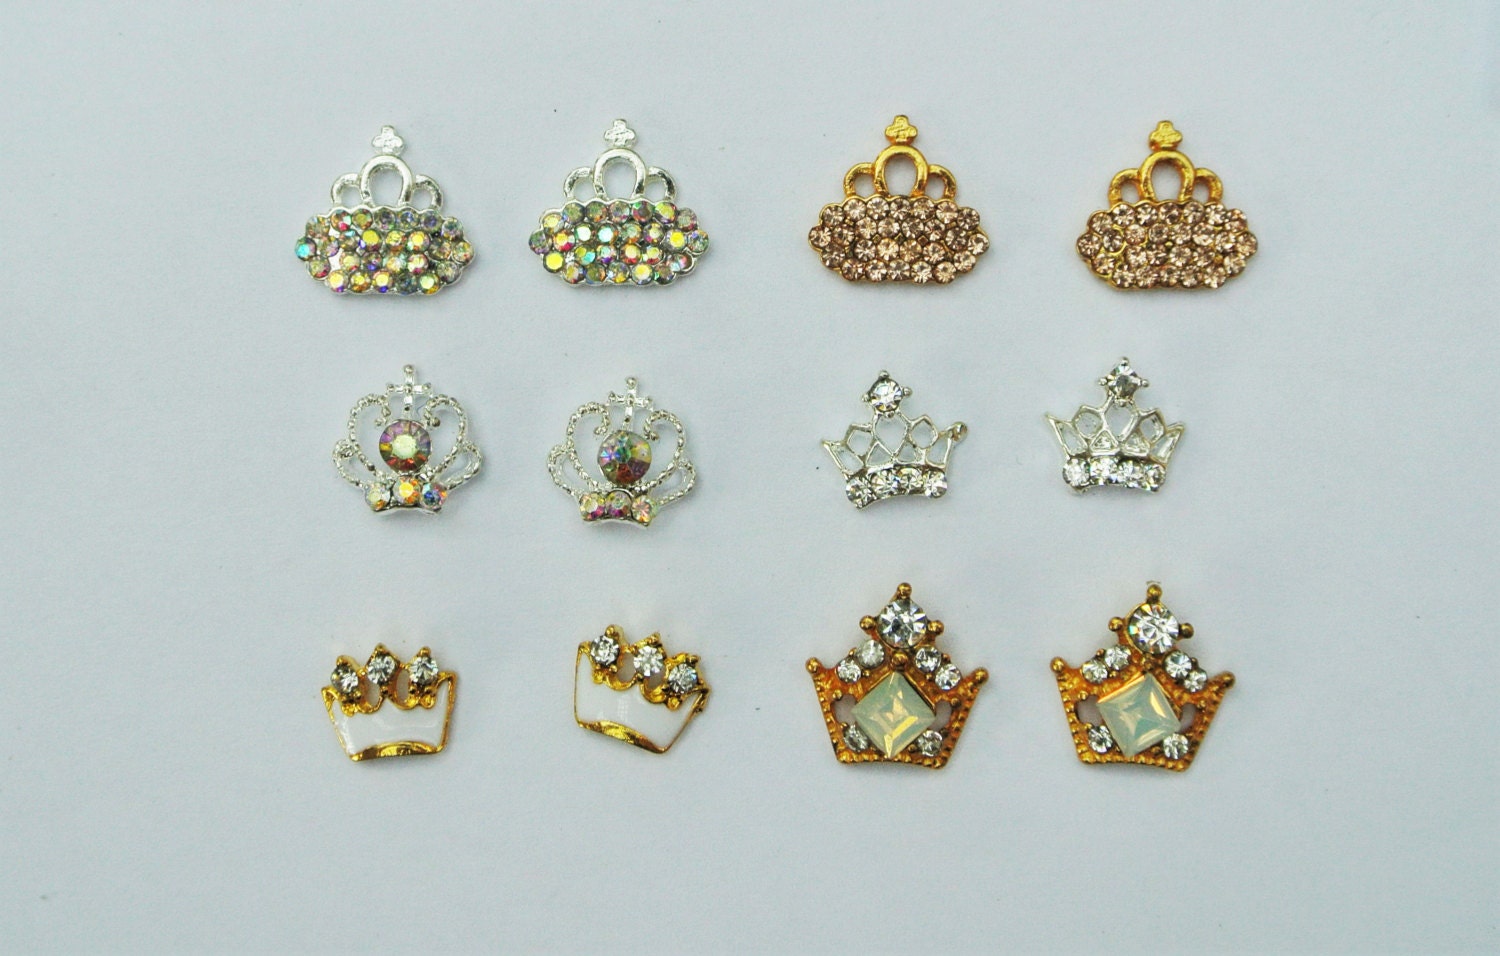 JERCLITY 30 Pieces 3D Gold and Silver Crown Nail Charms for Nails